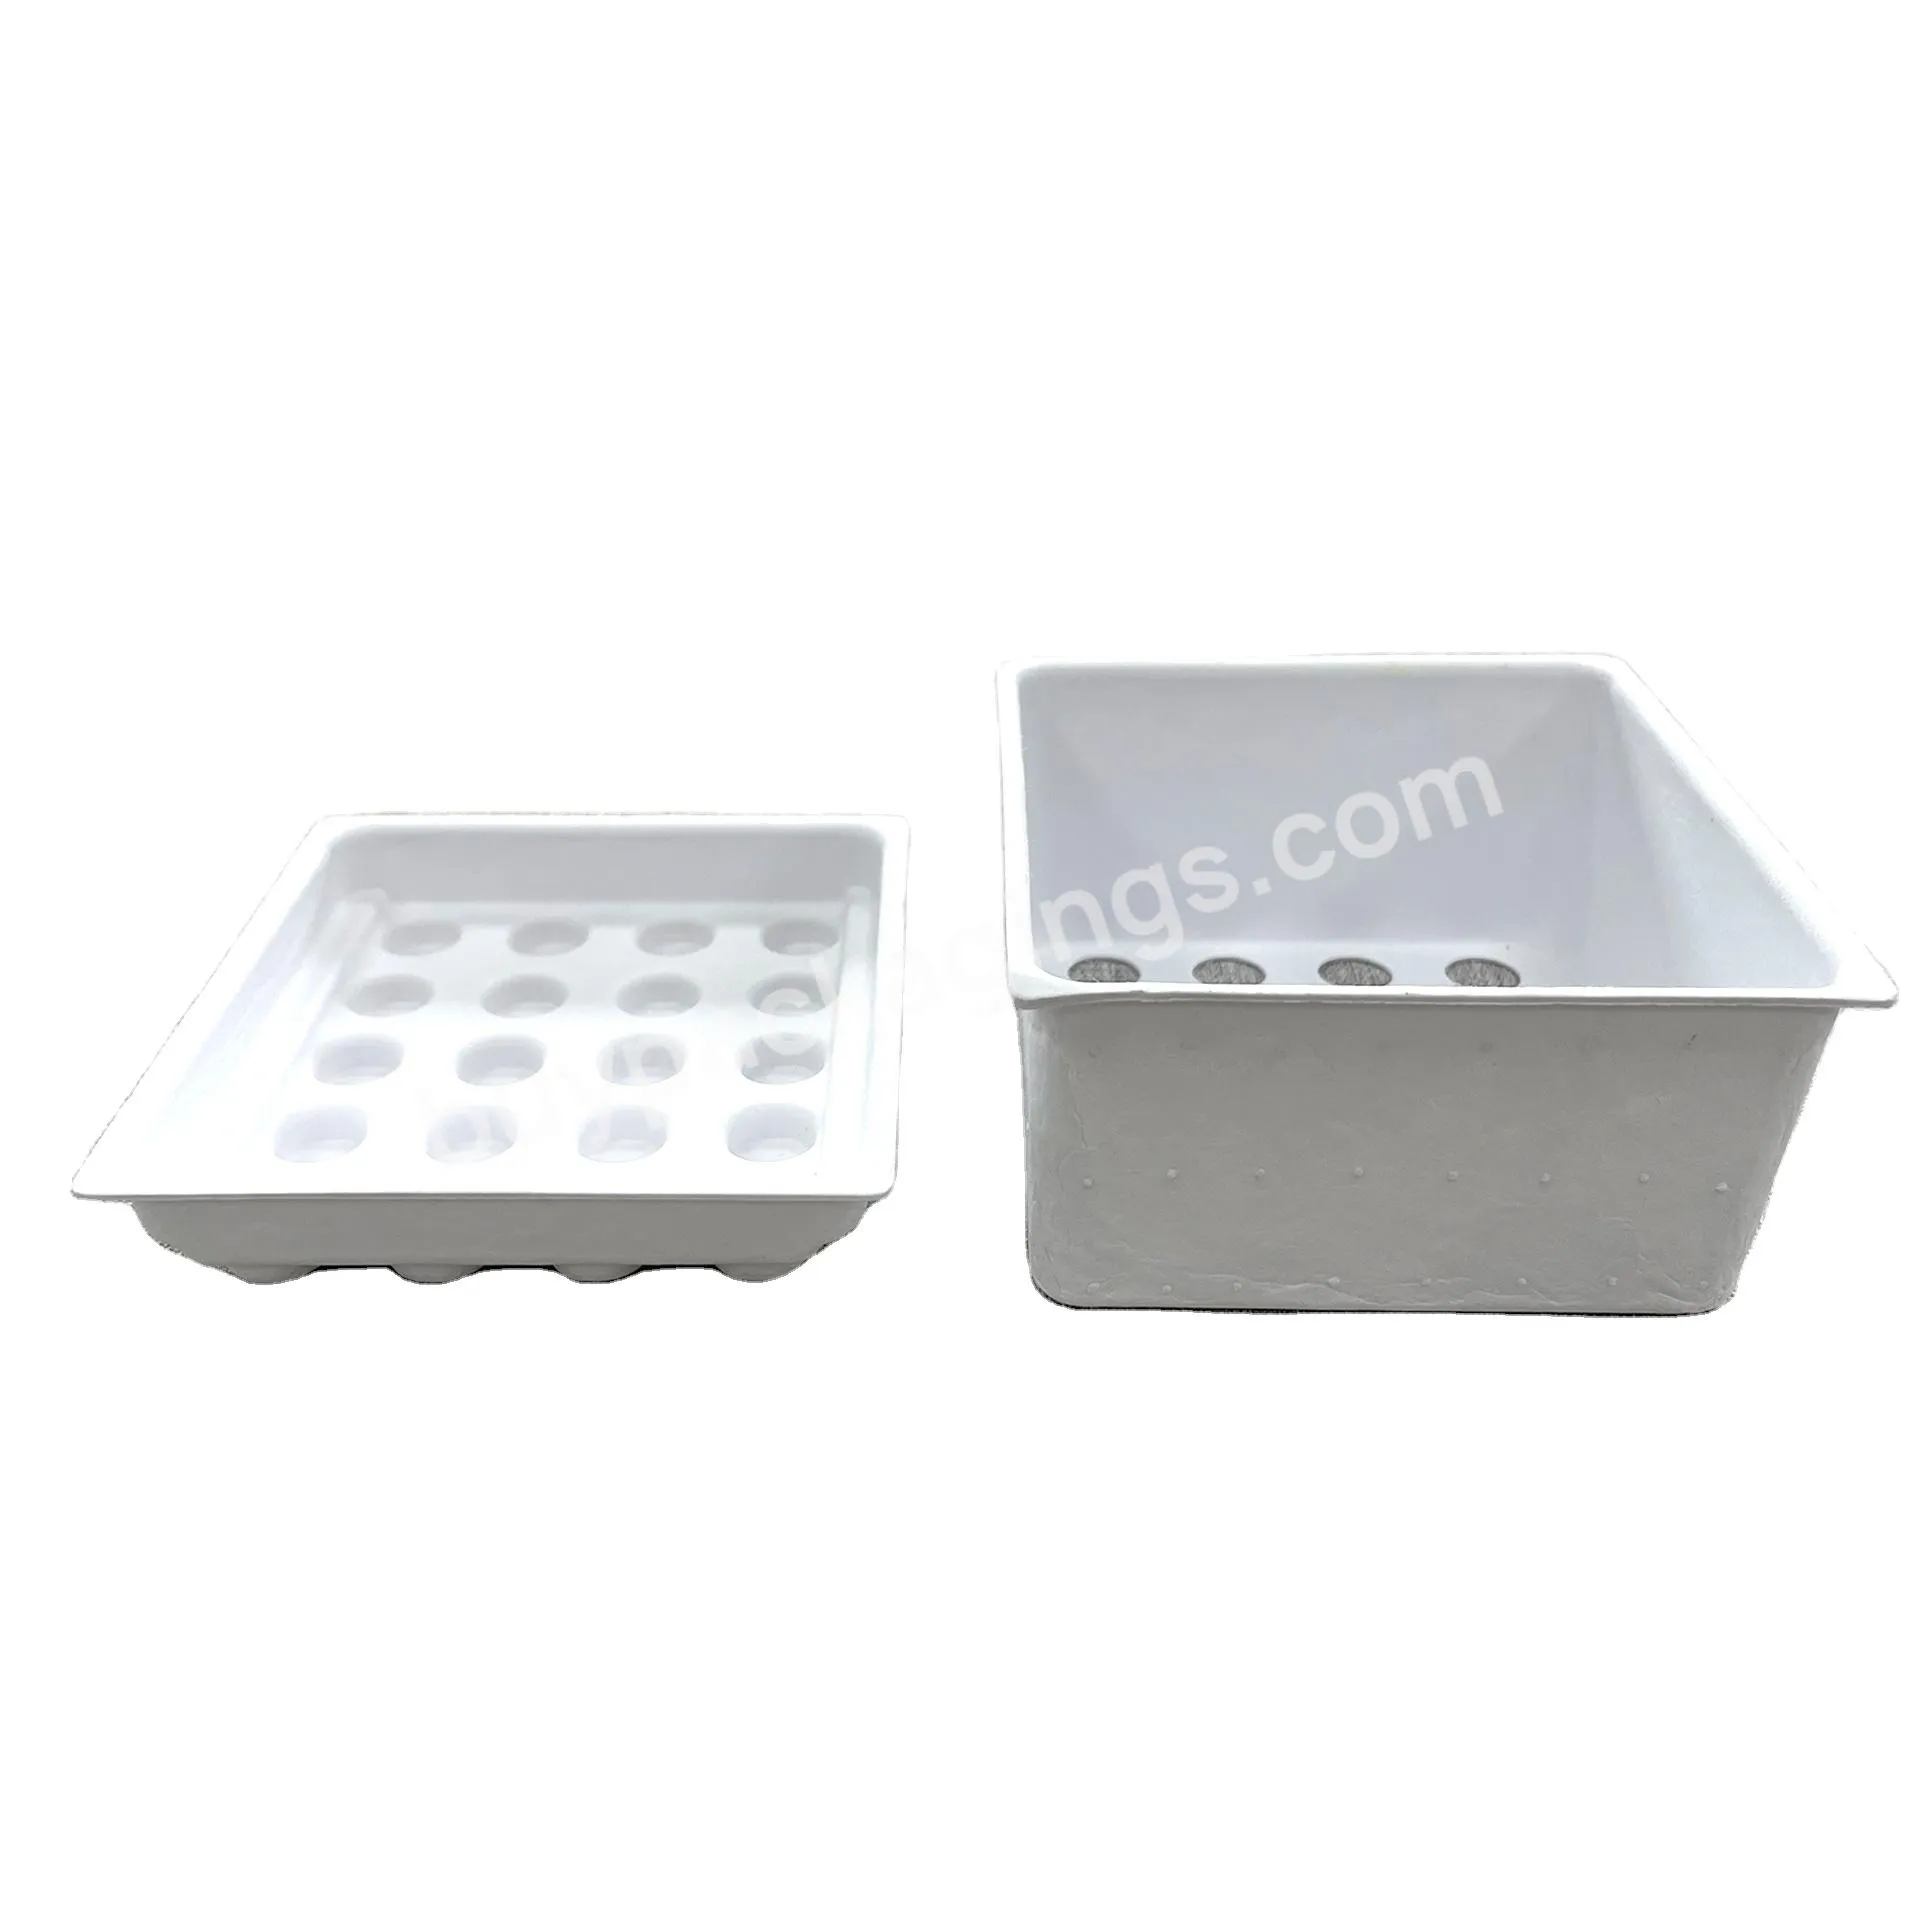 White Eco-friendly Cosmetics Essence Paper Molded Pulp Square Inner Tray Packaging With Free Design - Buy Skincare Packaging Tray,Perfume Pulp Tray,Perfume Sample Packaging.